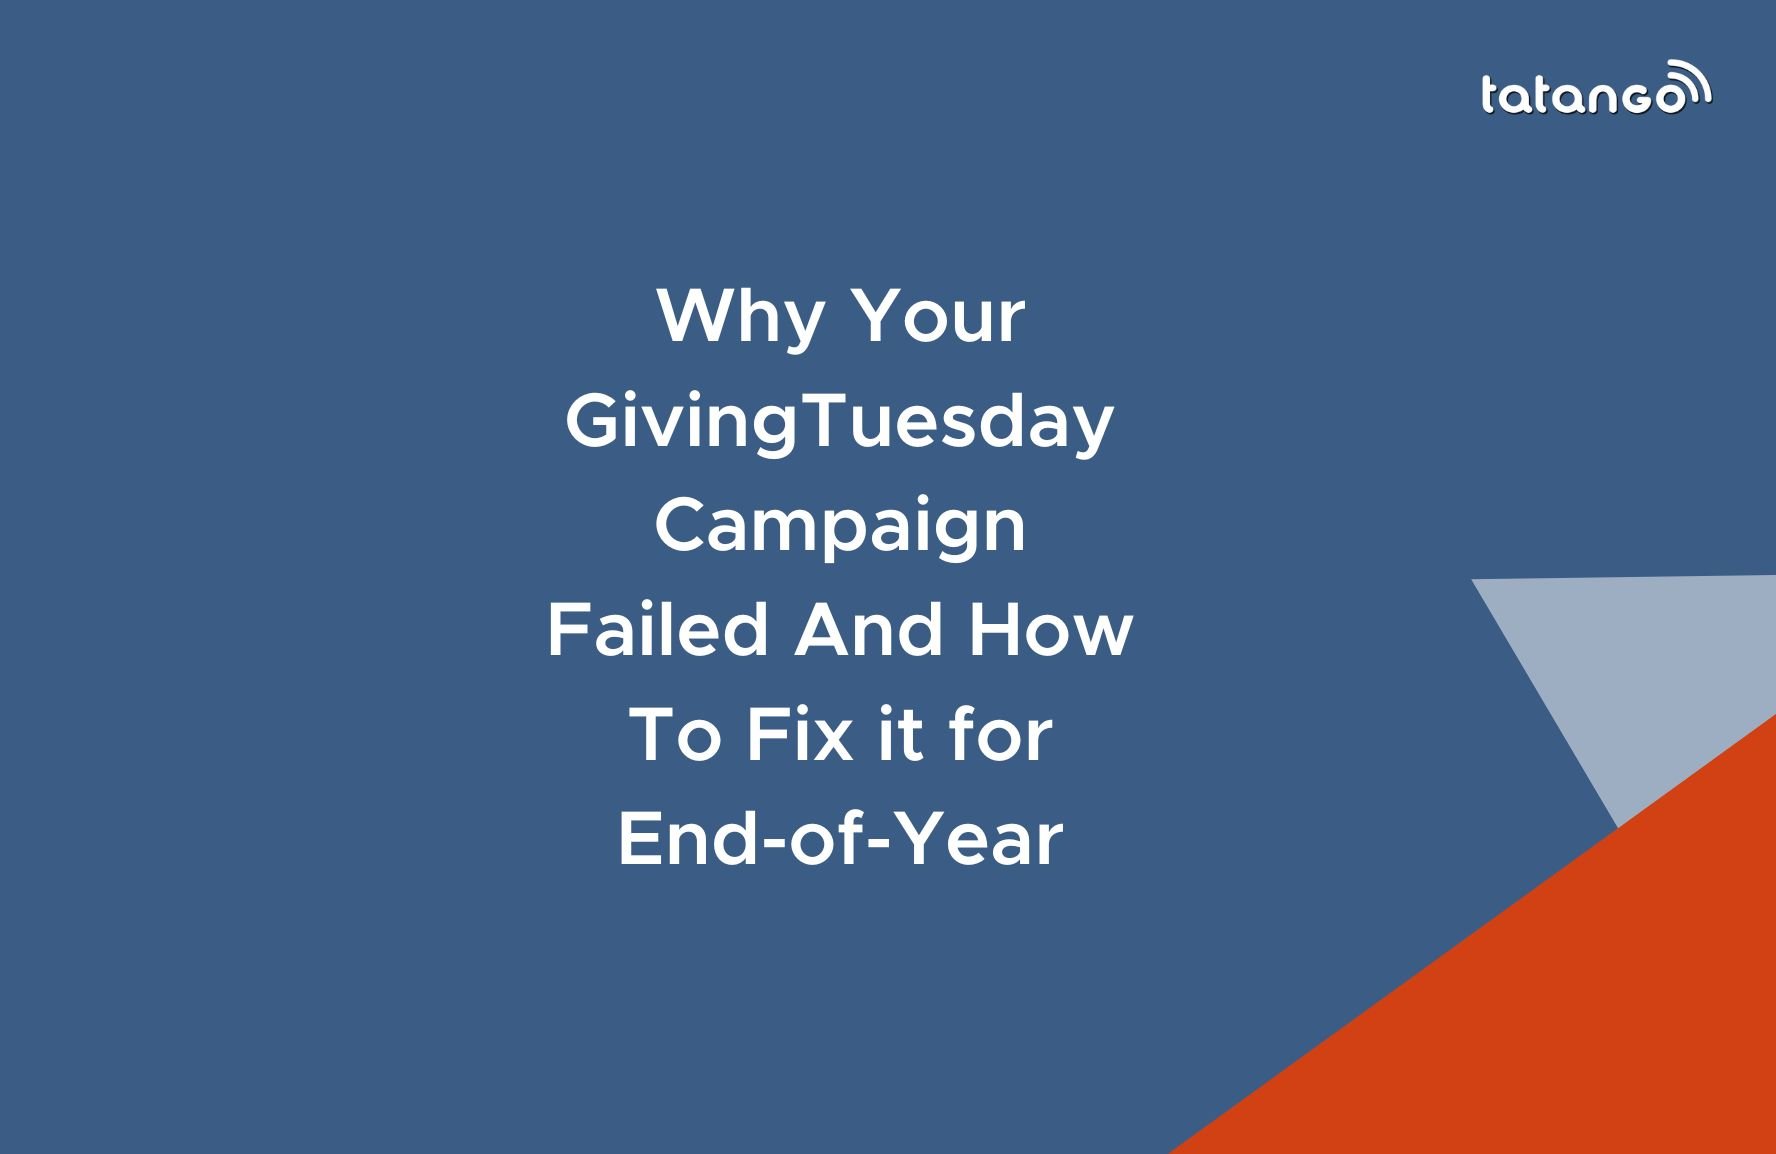 Why Your Giving Tuesday Campaign Failed And How To Fix it for EOY